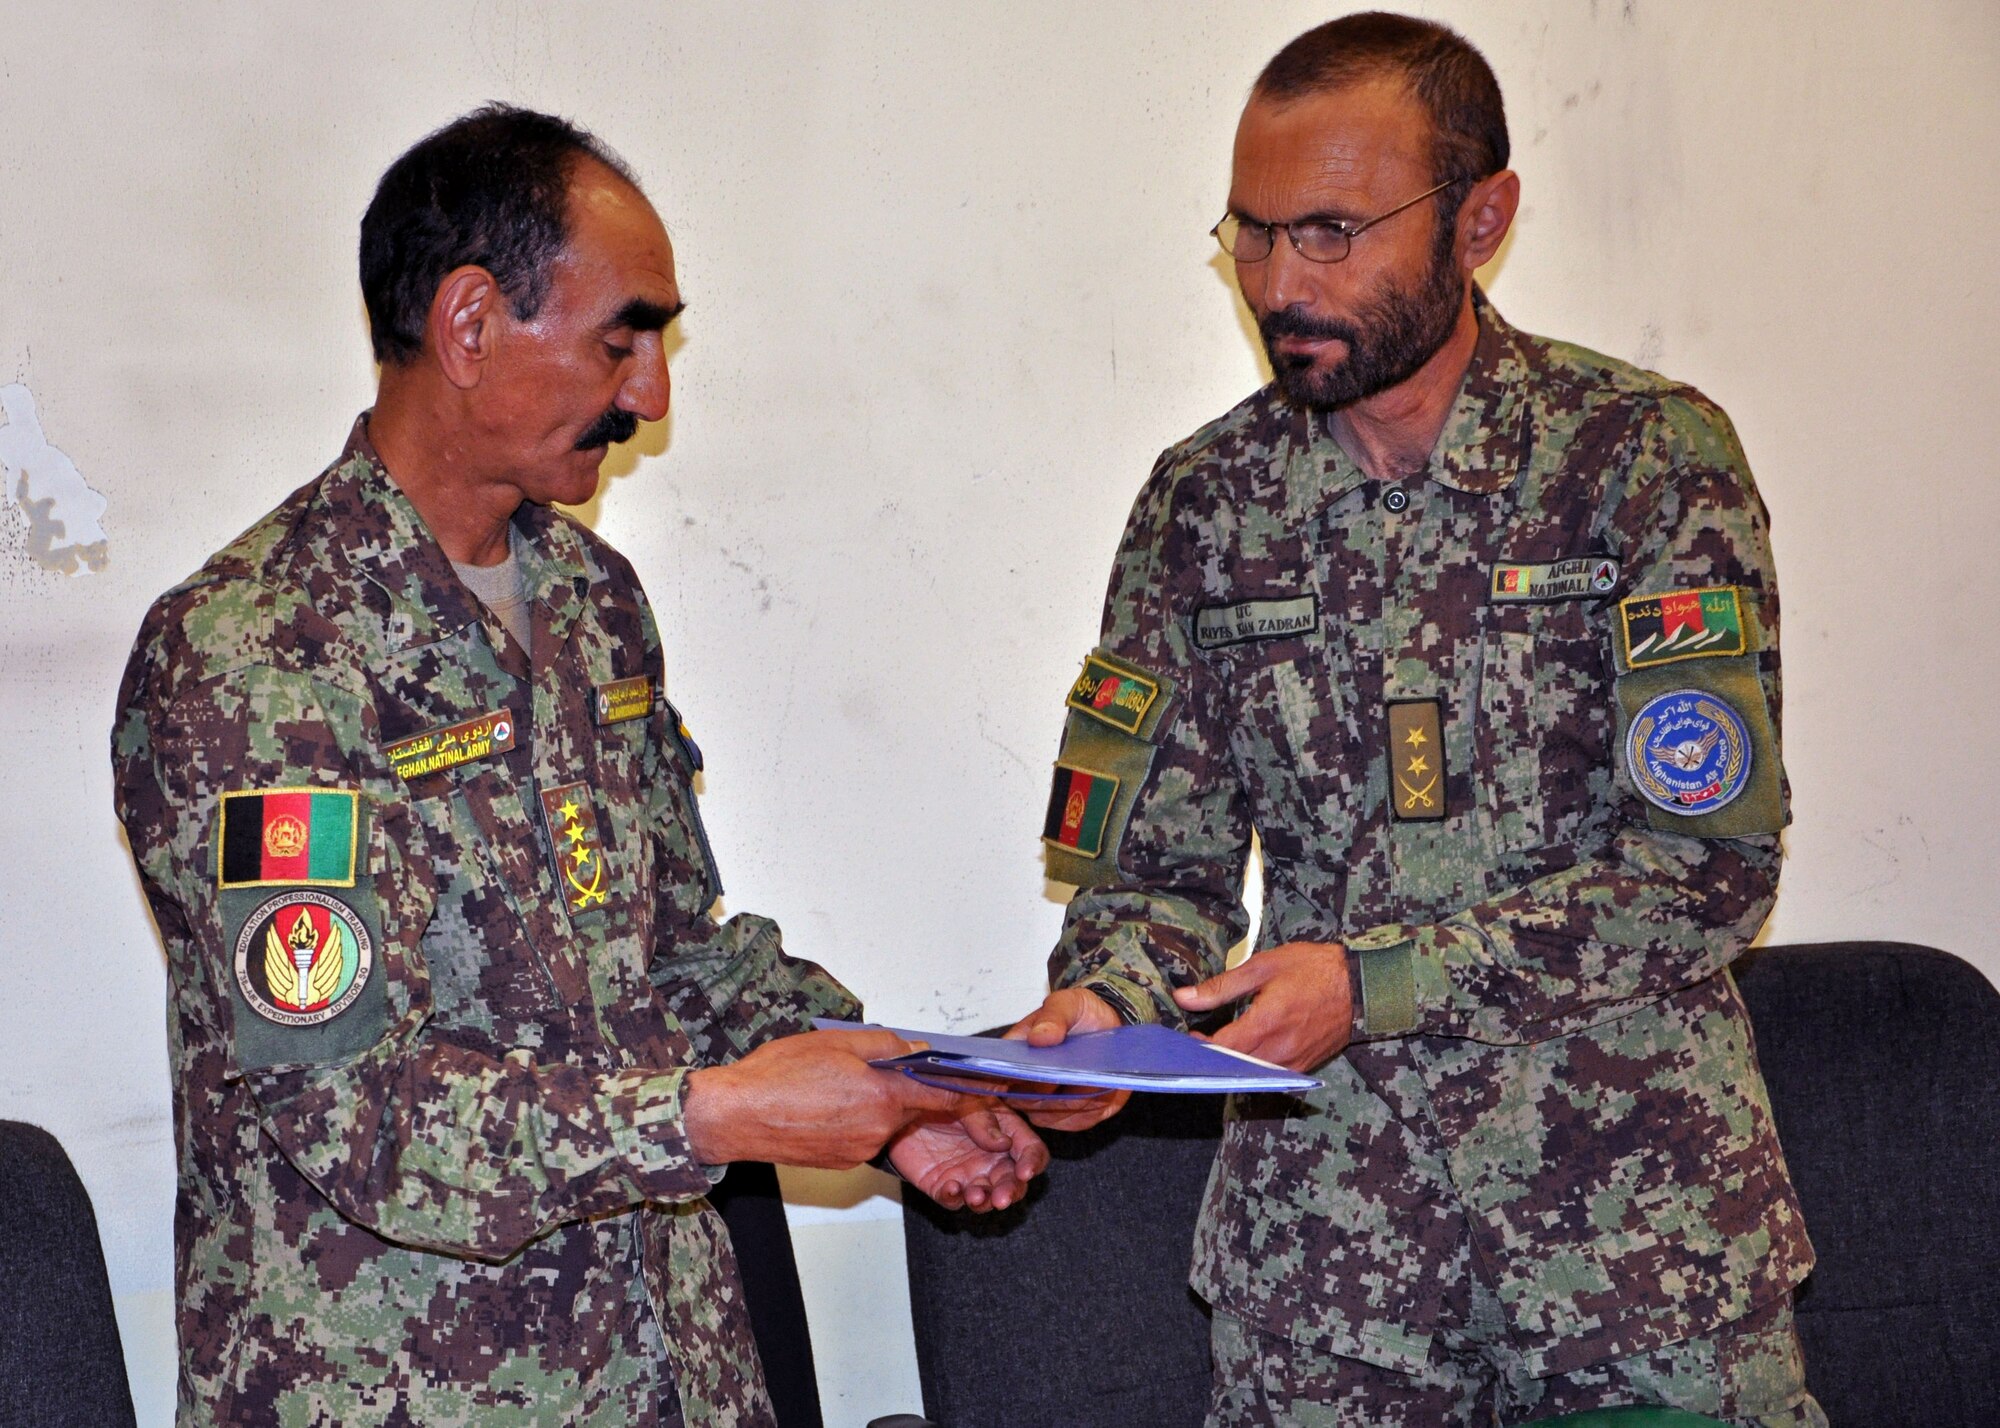 Afghan Air Force Lt. Col. Raees Khan, PeH education planning officer, official hands over six newly signed training decrees to Col. Mahmood Rahman, Commandant of Pohantoon-e-Hawayee “Air University”, in a ceremony May 4, 2013 at Kabul International Airport, Afghanistan. The development of the decrees was a team effort between the PeH leadership and their advisors from NATO Air Training Command-Afghanistan. The implementation of these decrees marks the first time in the school’s history to have standard operating procedures for the teaching of the students. (U.S. Air Force photo/Capt. Anastasia Wasem)